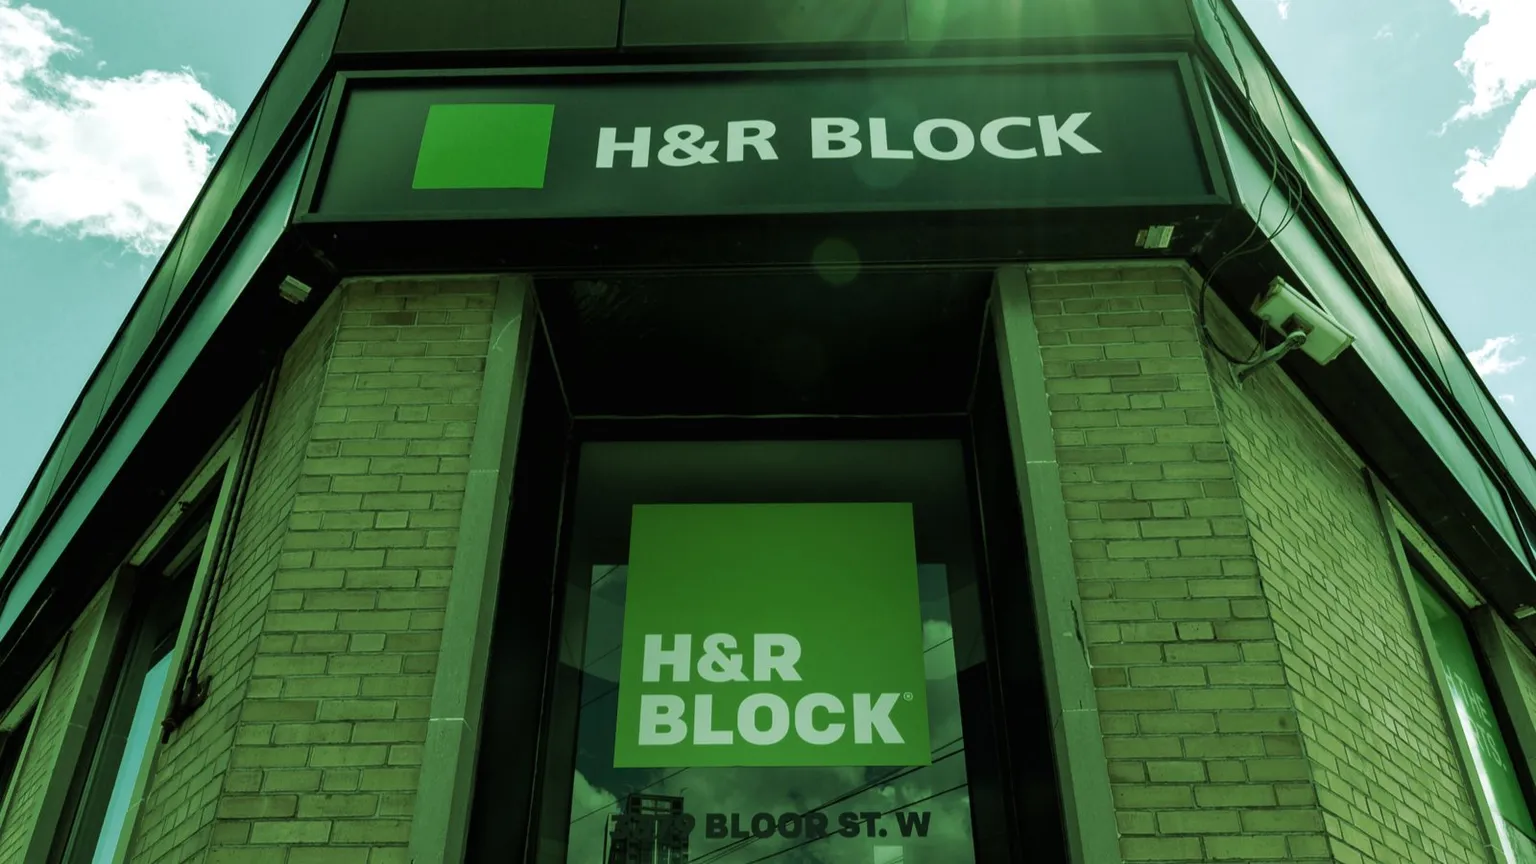 H&R Block is an U.S. firm that helps clients file their taxes. Image: Shutterstock.